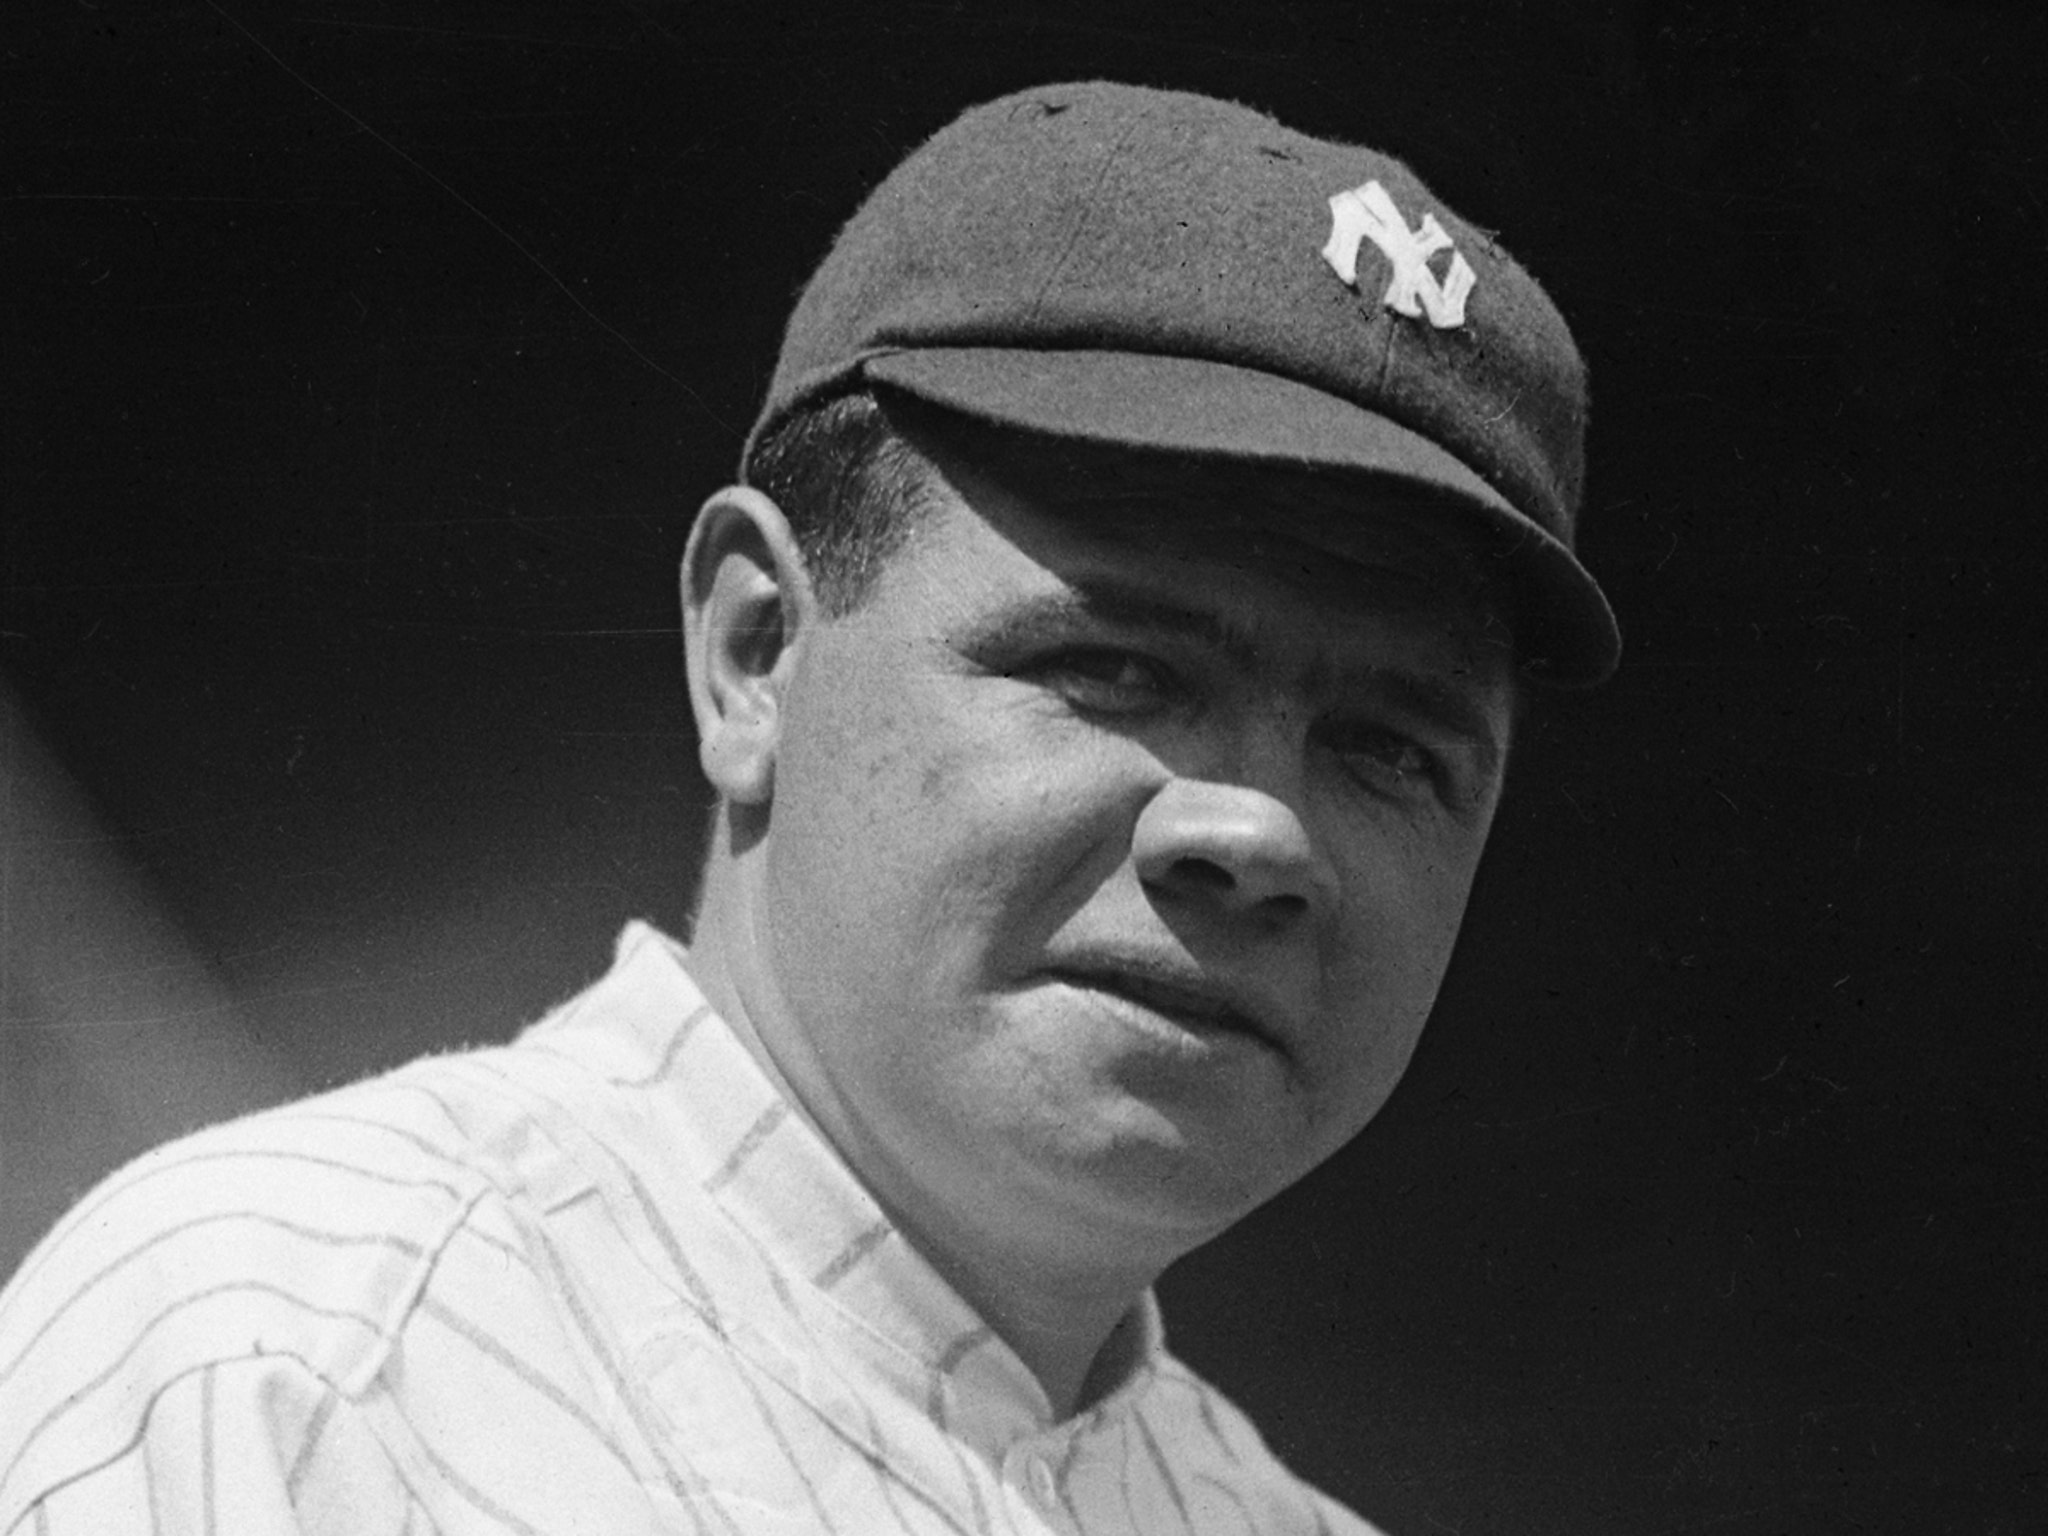 Usa Babe Ruth Postage Stamp Stock Photo - Download Image Now